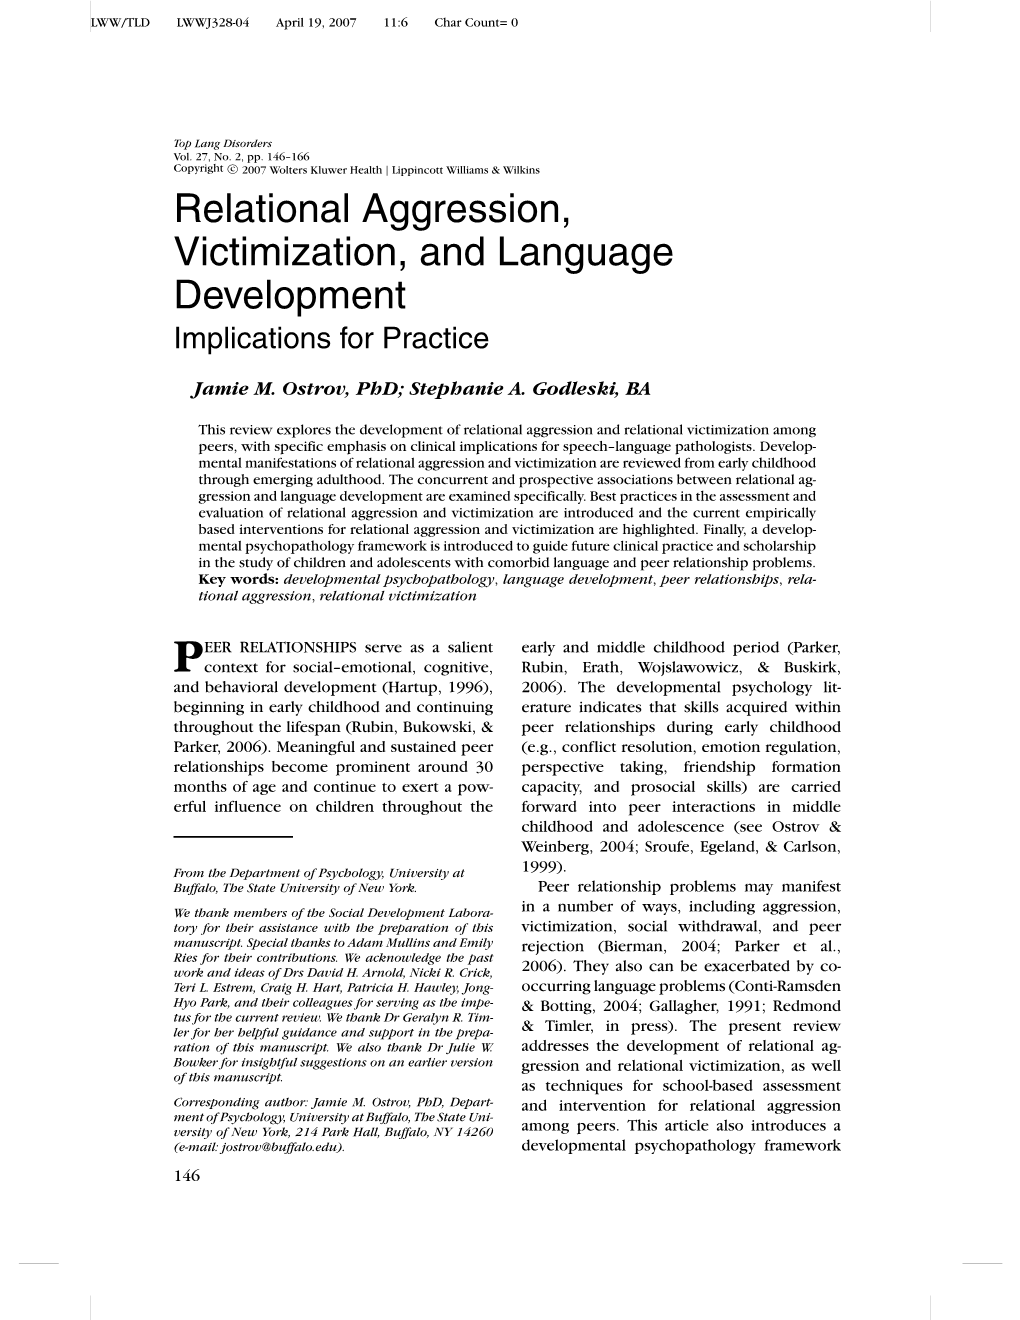 Relational Aggression, Victimization, and Language Development Implications for Practice